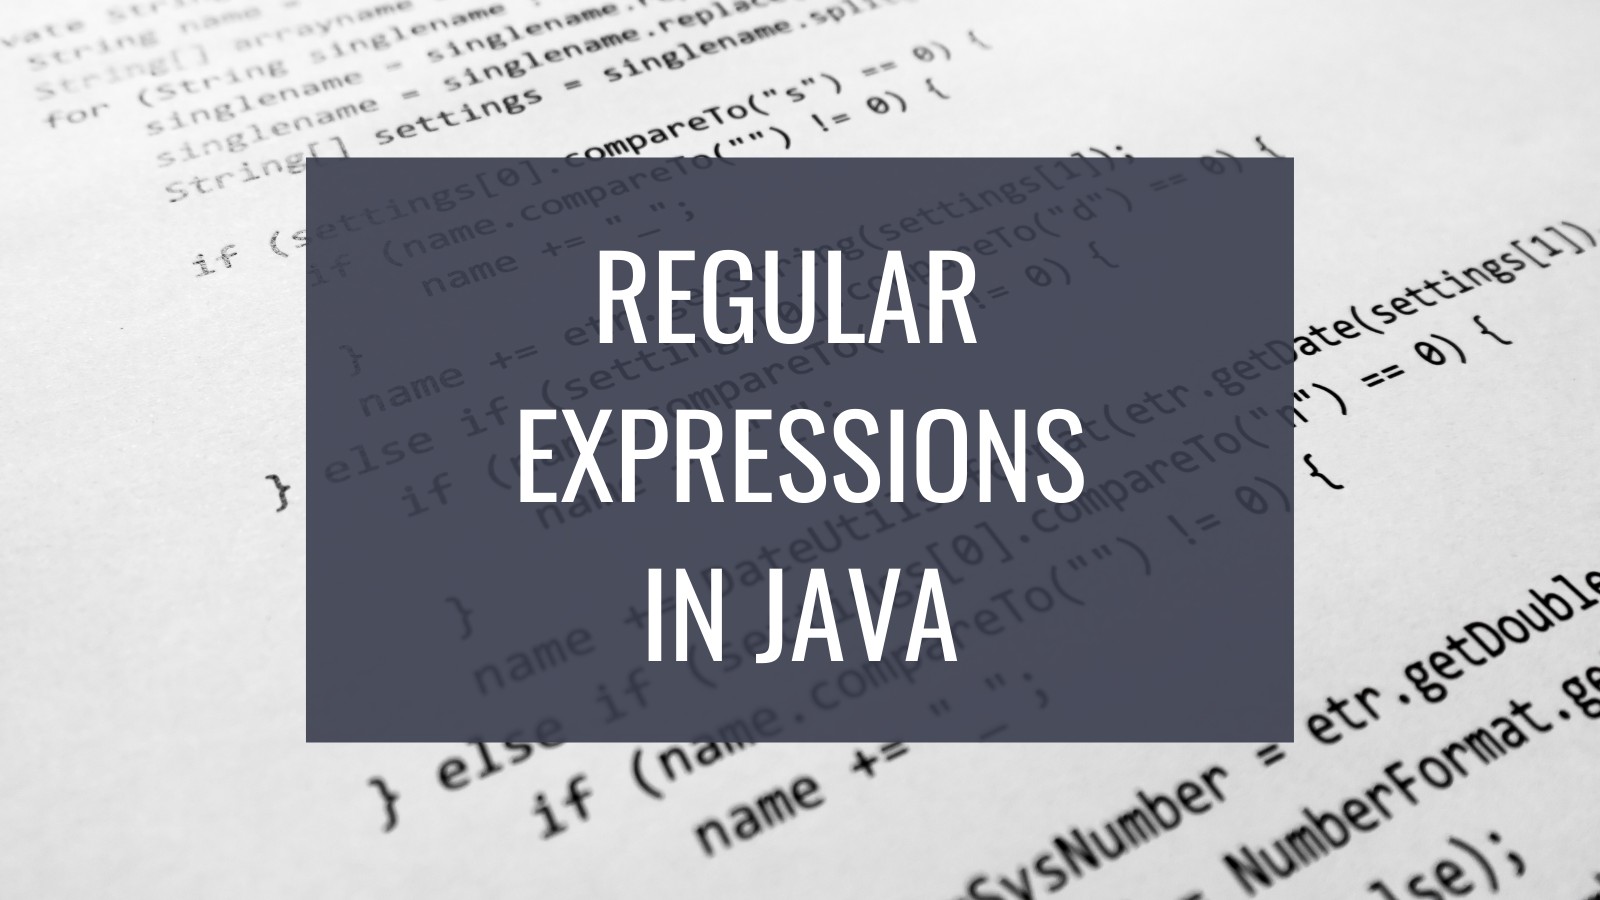 A Quick Guide to Regular Expressions in Java